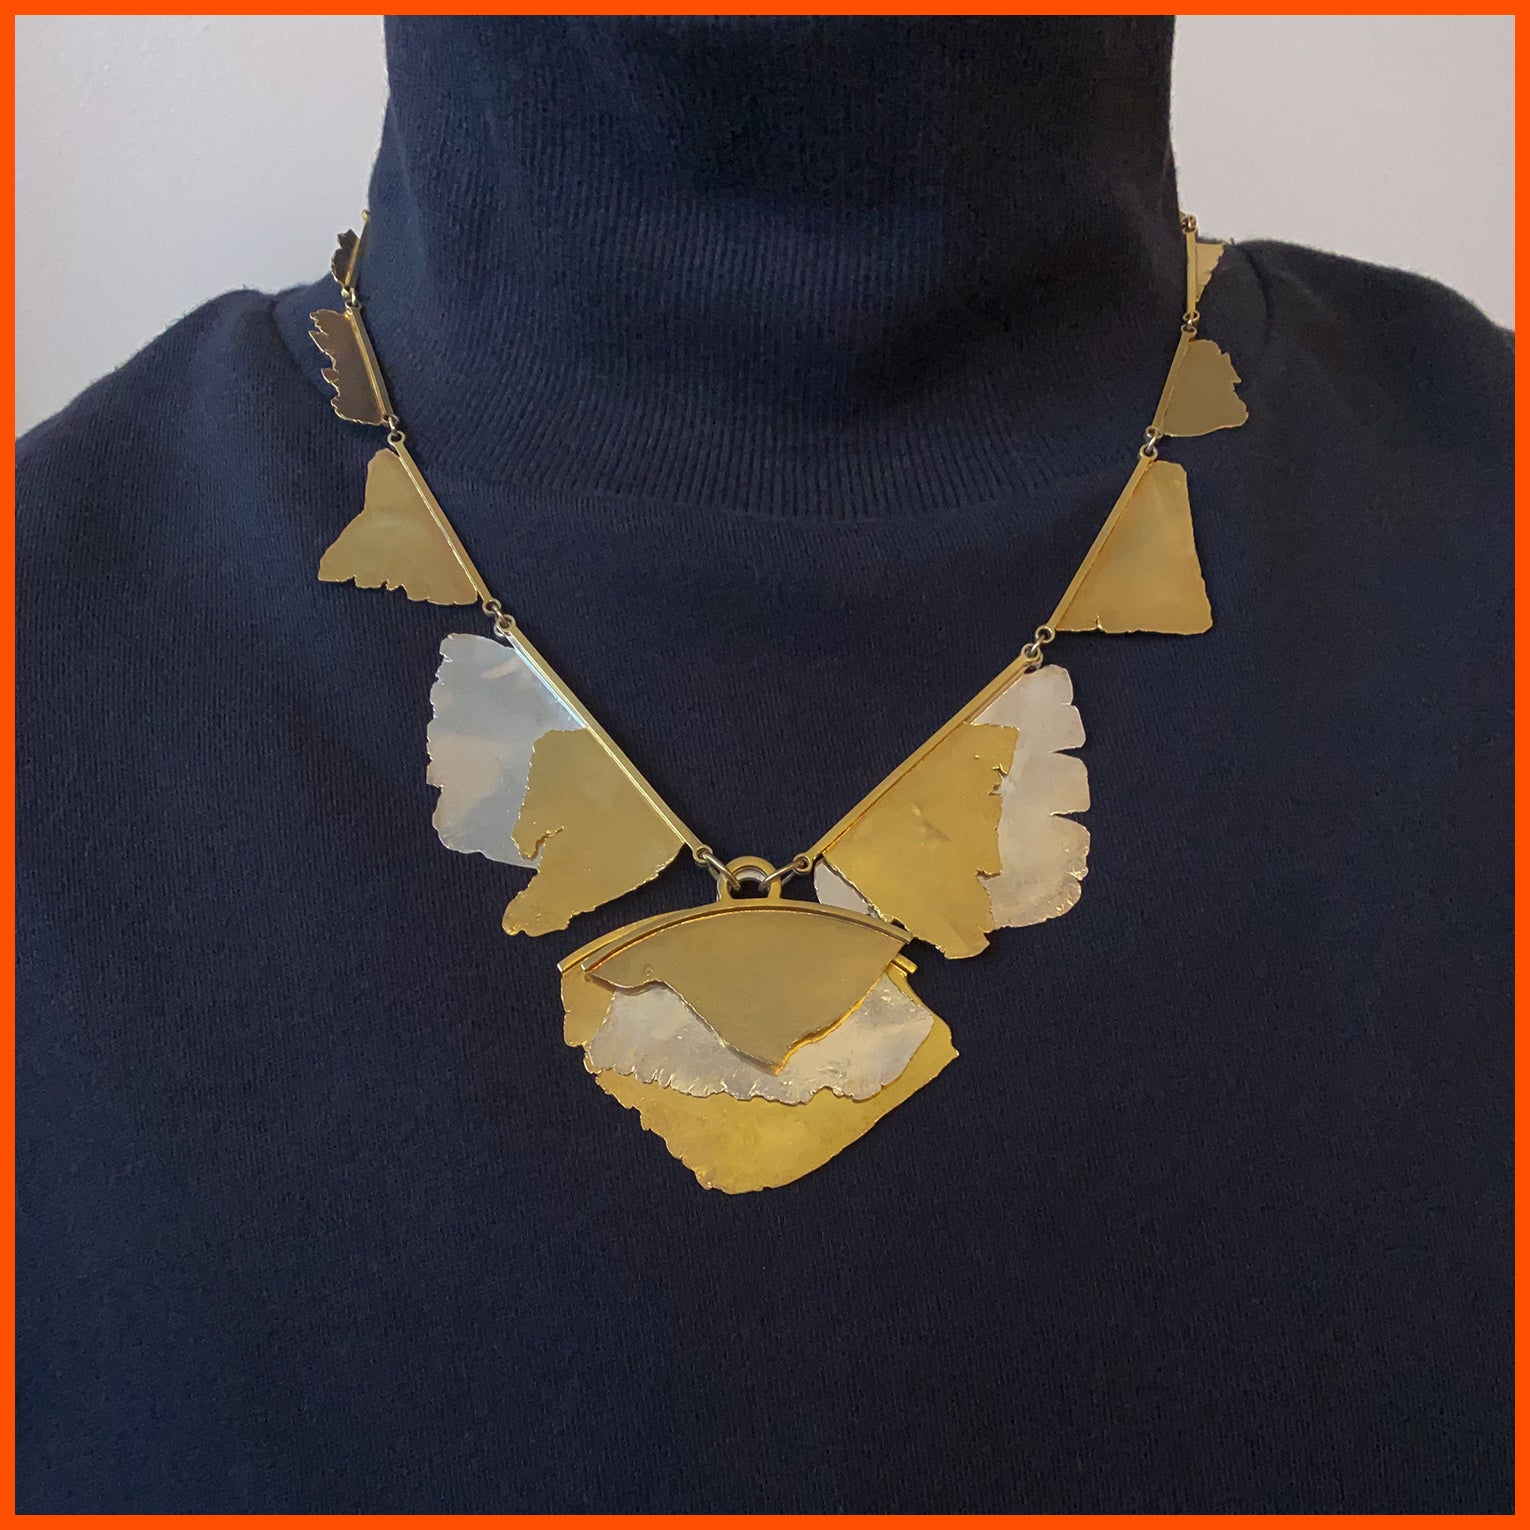 Torn Gold and Silver Layered Necklace